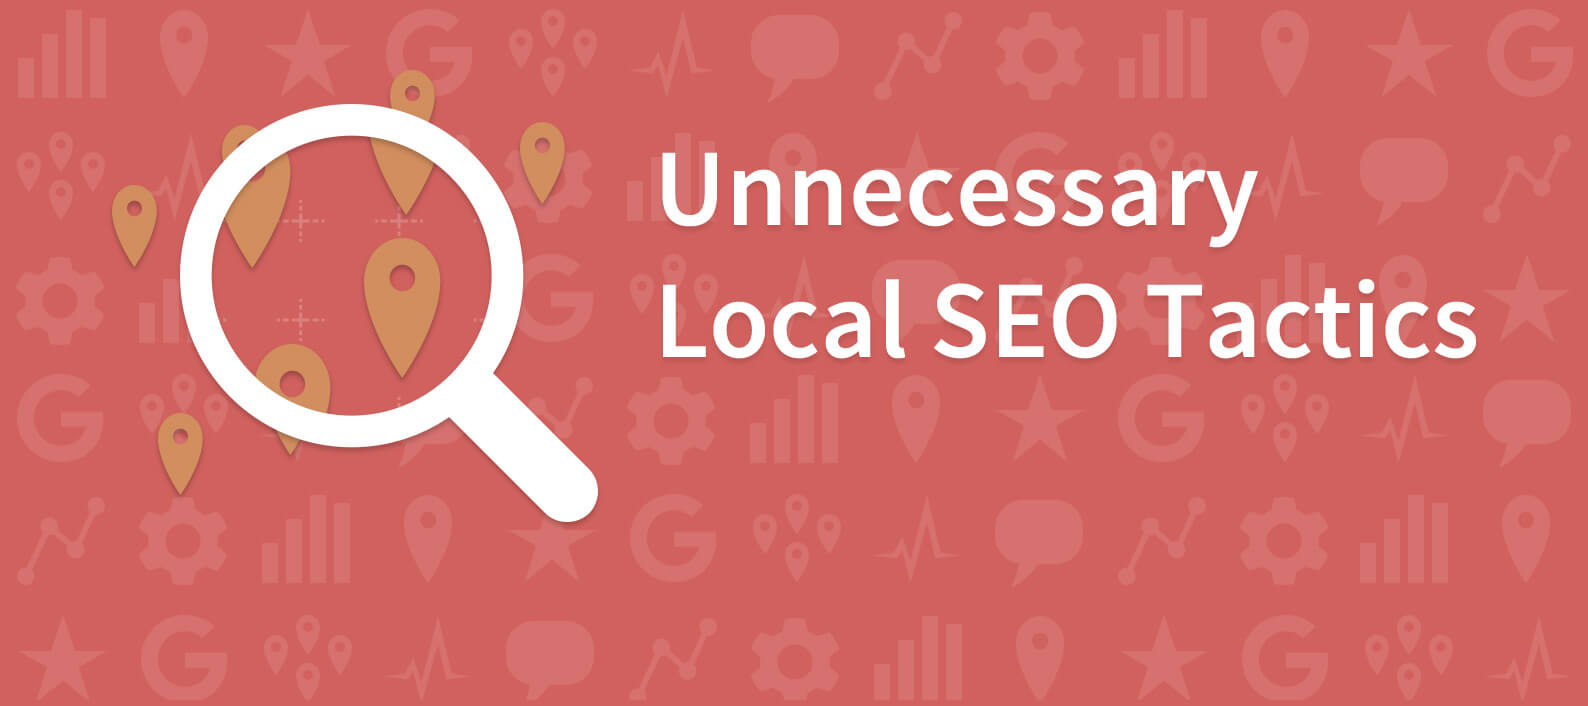 5 Local SEO tactics you need to stop doing today - BrightLocal